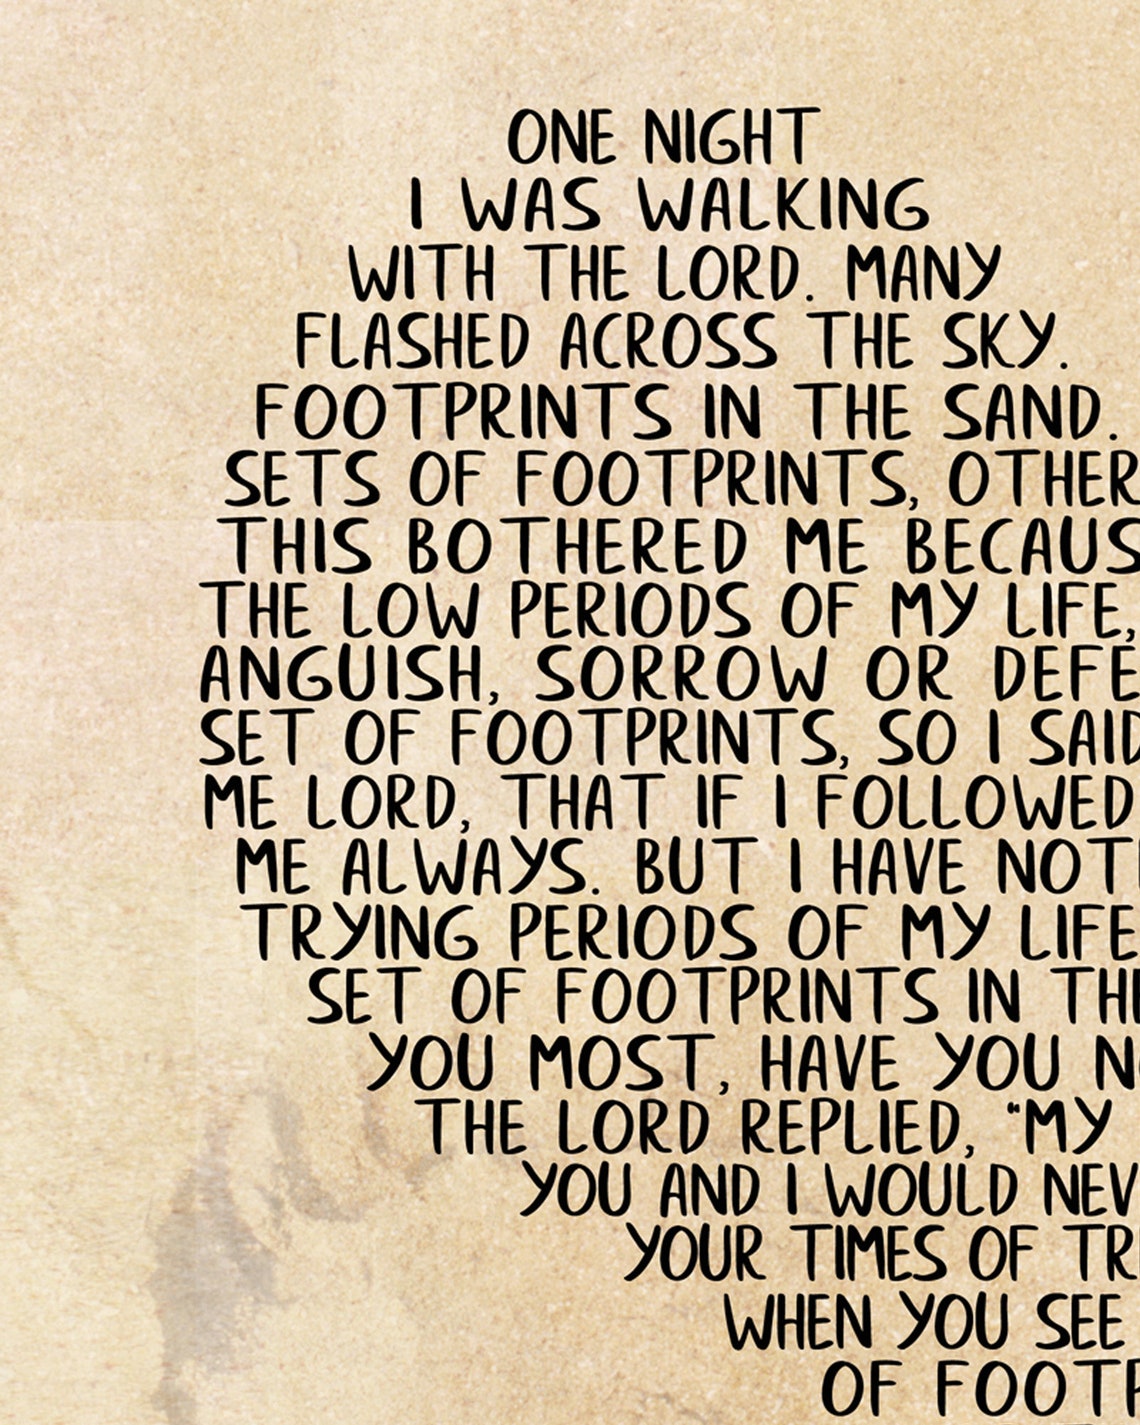 footprints-in-the-sand-a-personal-favourite-poem-footprints-in